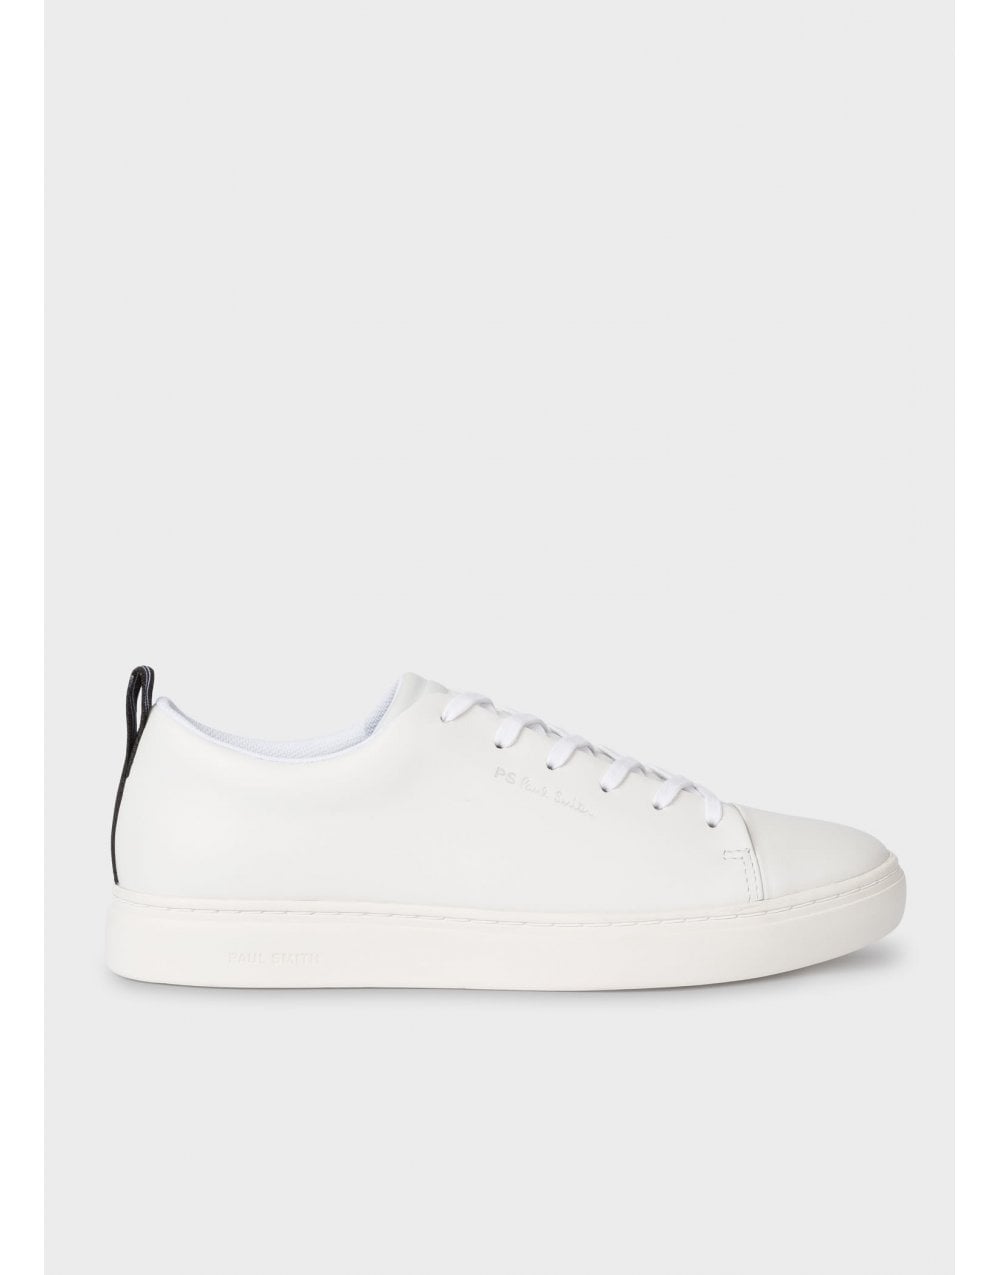 Paul Smith White Lee Classic Leather Trainer